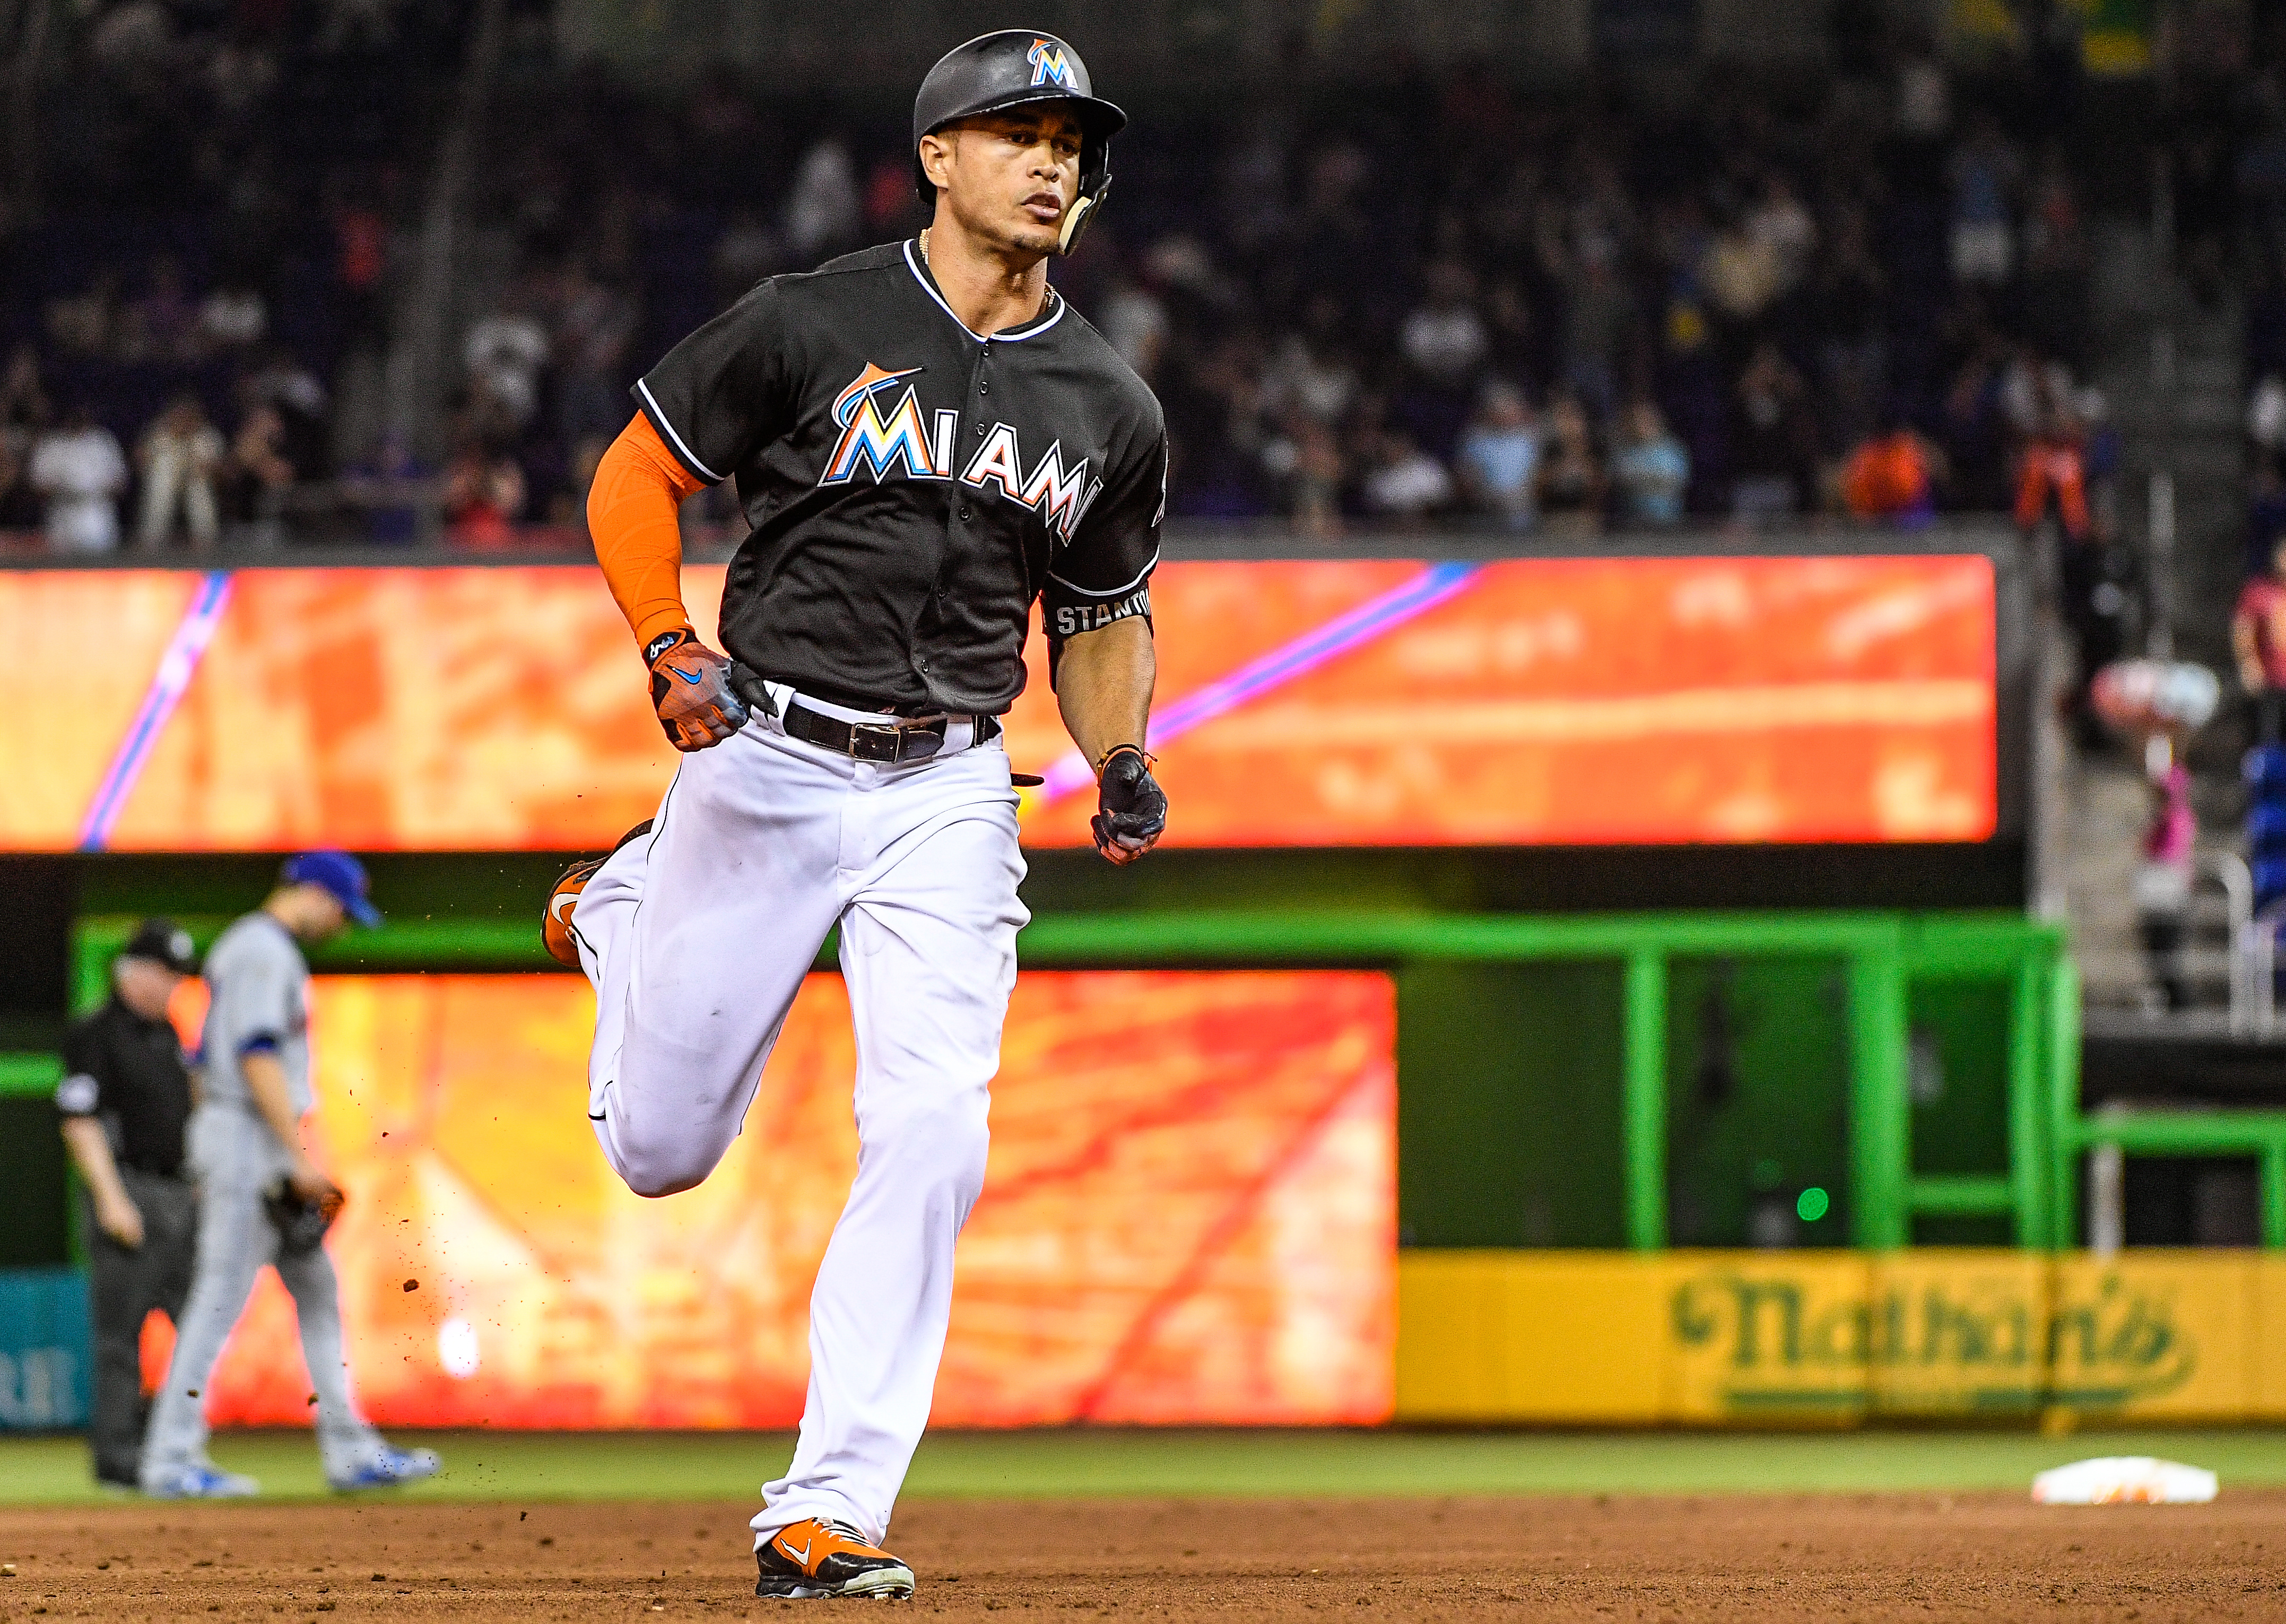 Giancarlo Stanton #27 of the Miami Marlins hits the go ahead home run in the eighth inning during the game between the Miami Marlins and the New York Mets at Marlins Park on April 15, 2017 in Miami, Florida.